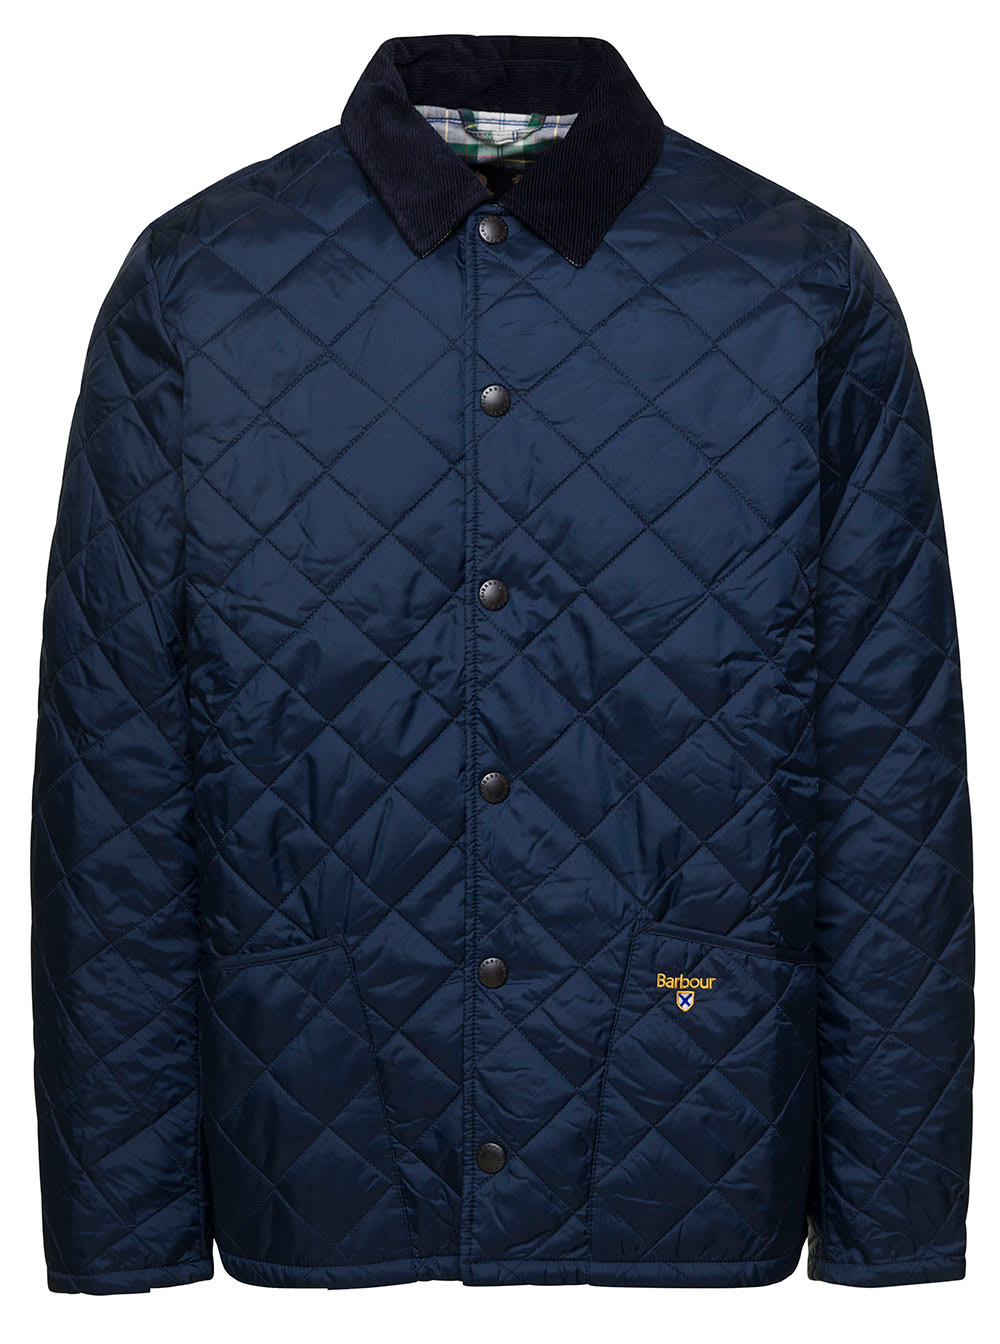 BARBOUR BLUE HERRON QUILTED JACKET WITH CONTRAST COLLAR IN POLYAMIDE MAN